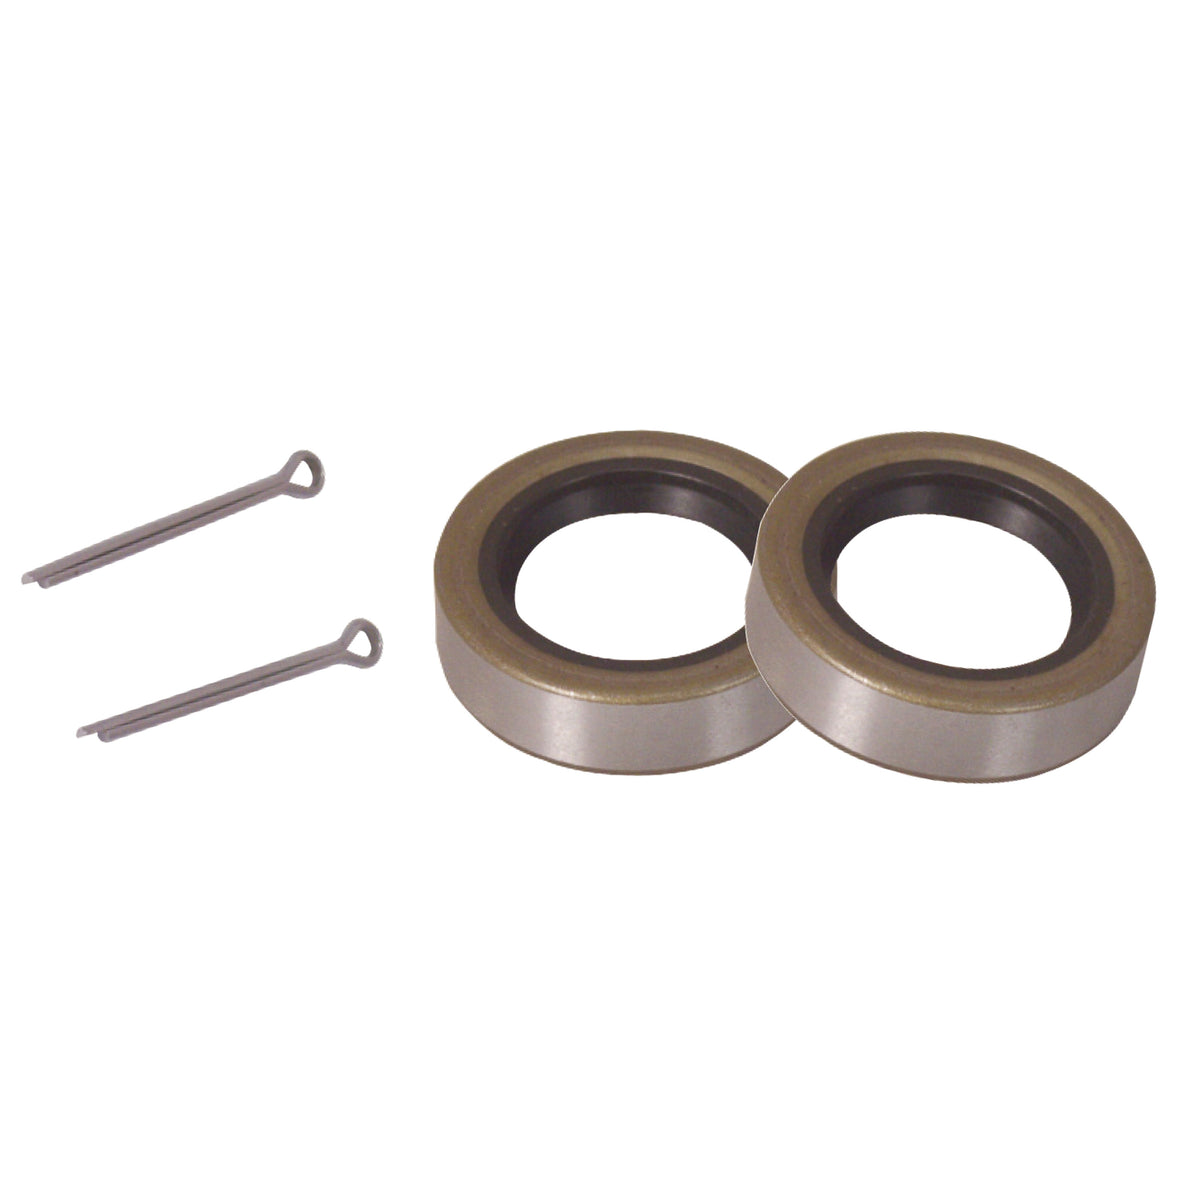 Dutton-Lainson 21884 Bearing Seals and Cotter Keys - 3/4 in.